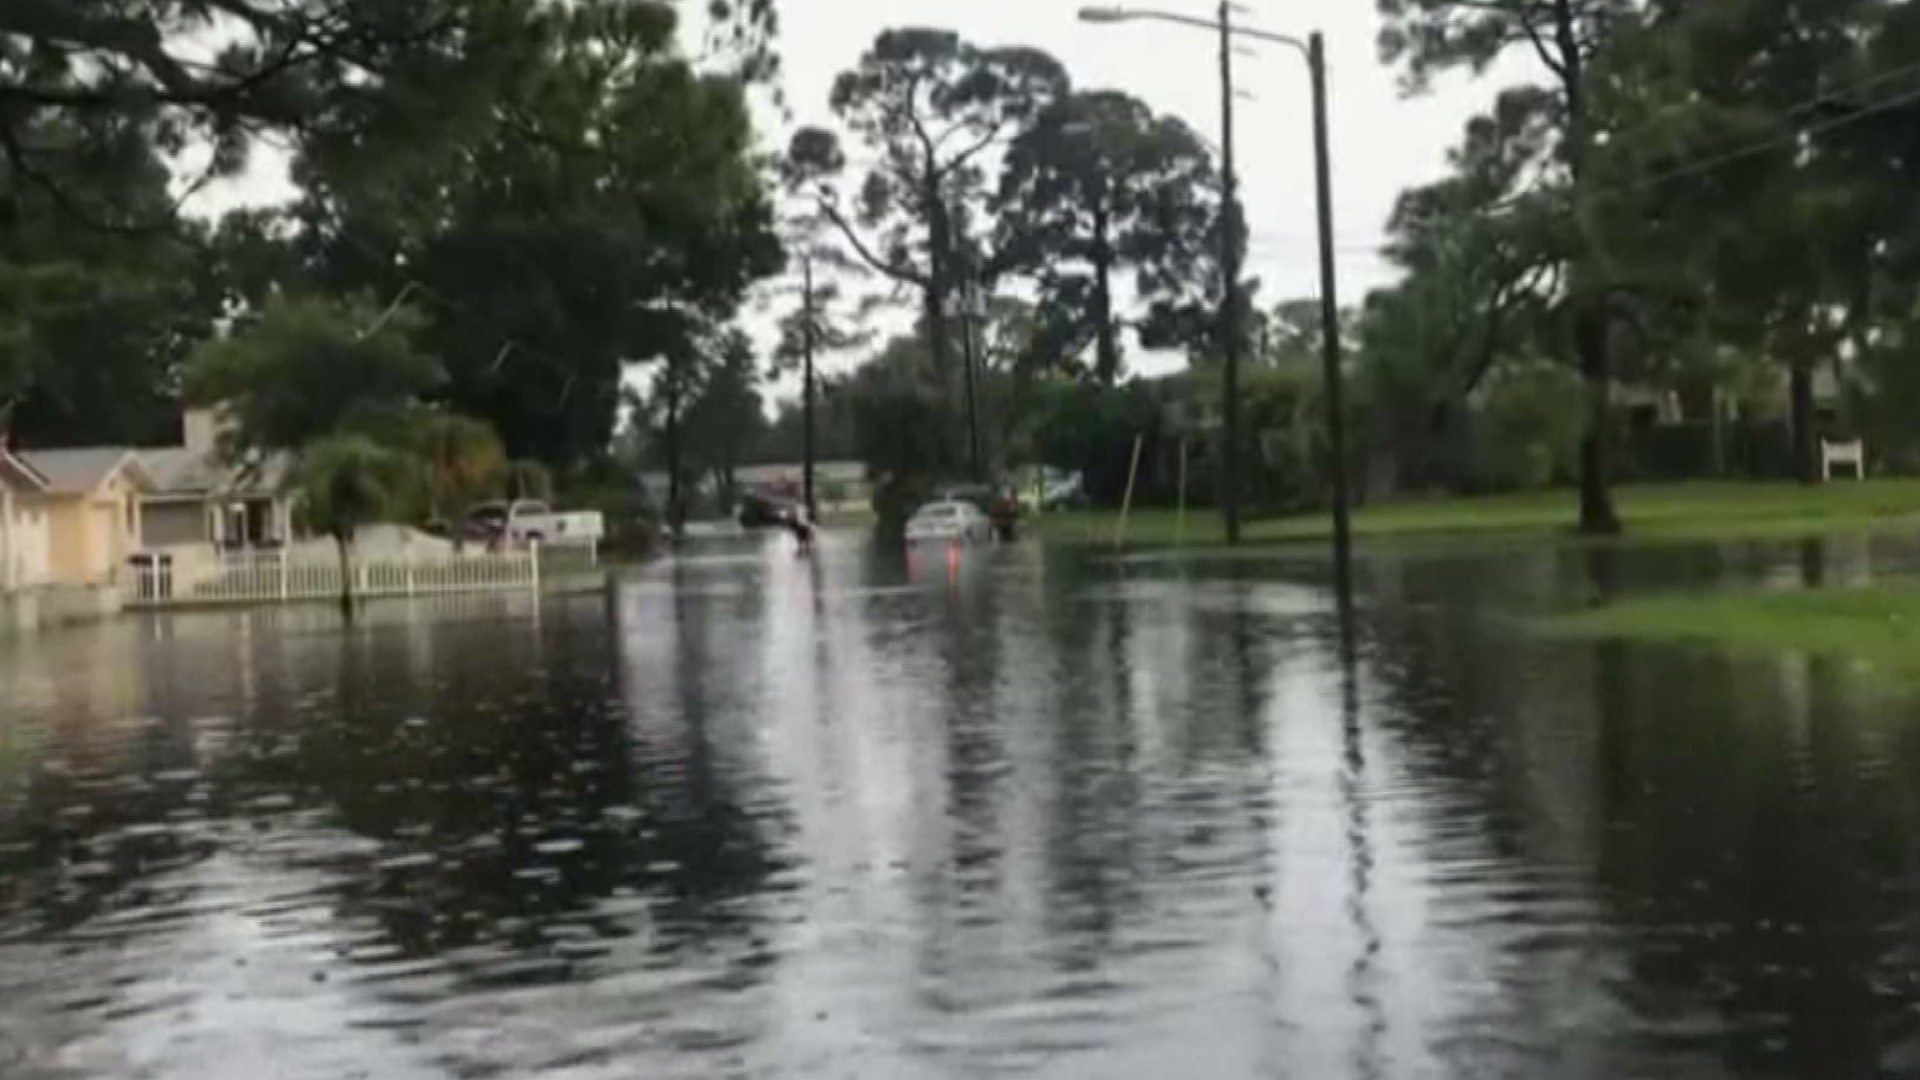 Scientists are expected to talk Thursday morning at the Hillsborough County Environmental Protection Commission meeting about the rising sea levels.

Tide gauges in Tampa Bay have recorded water levels rising at the rate of 1 inch per decade since the 1940s, a rate that scientists predict is likely to increase. https://on.wtsp.com/2yYMuVd